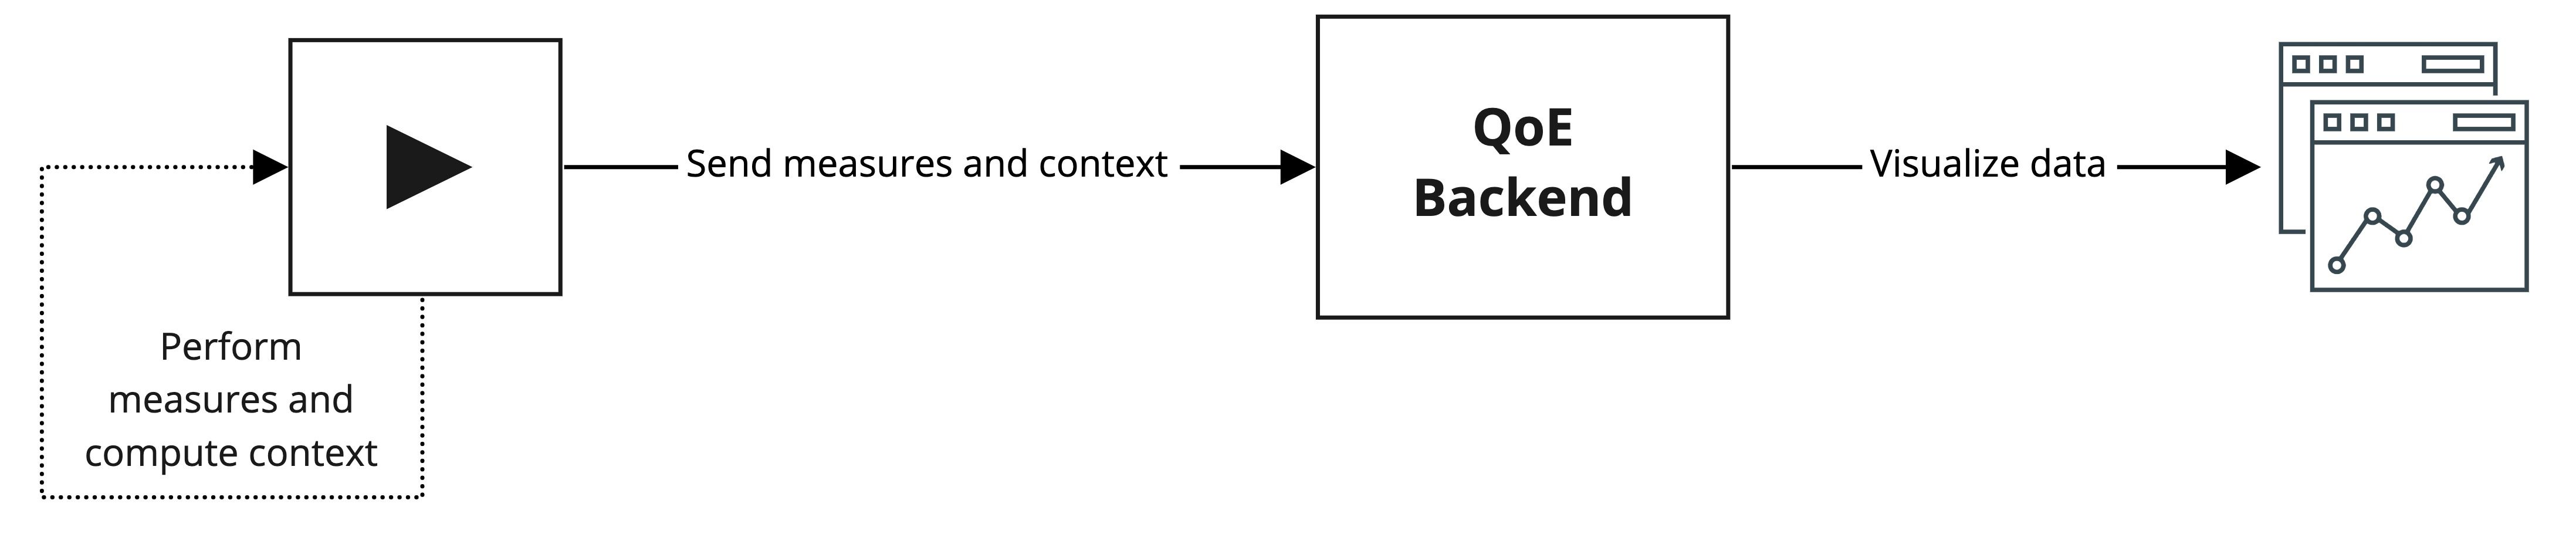 Quality of Experience workflow